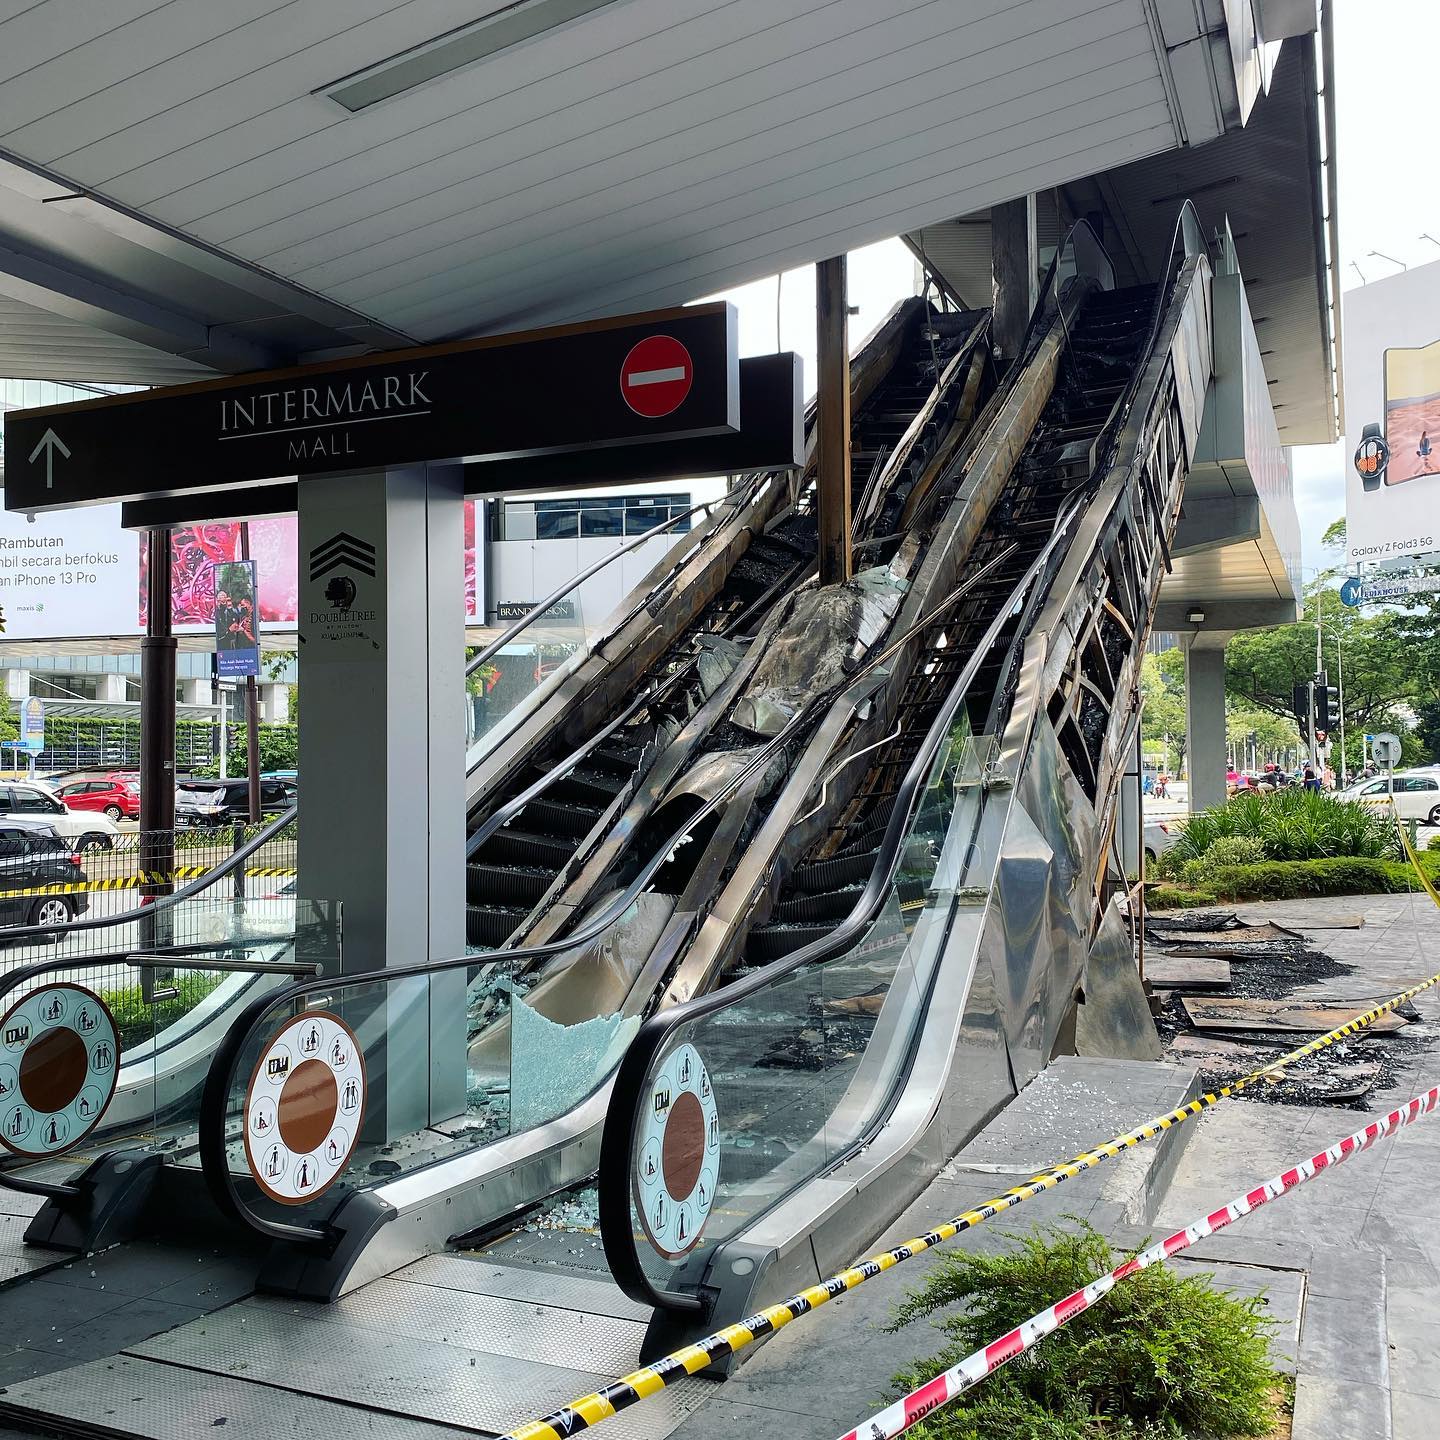 The aftermath of the fire shows that the entire escalator has been destroyed. Source: Optimist Coffee